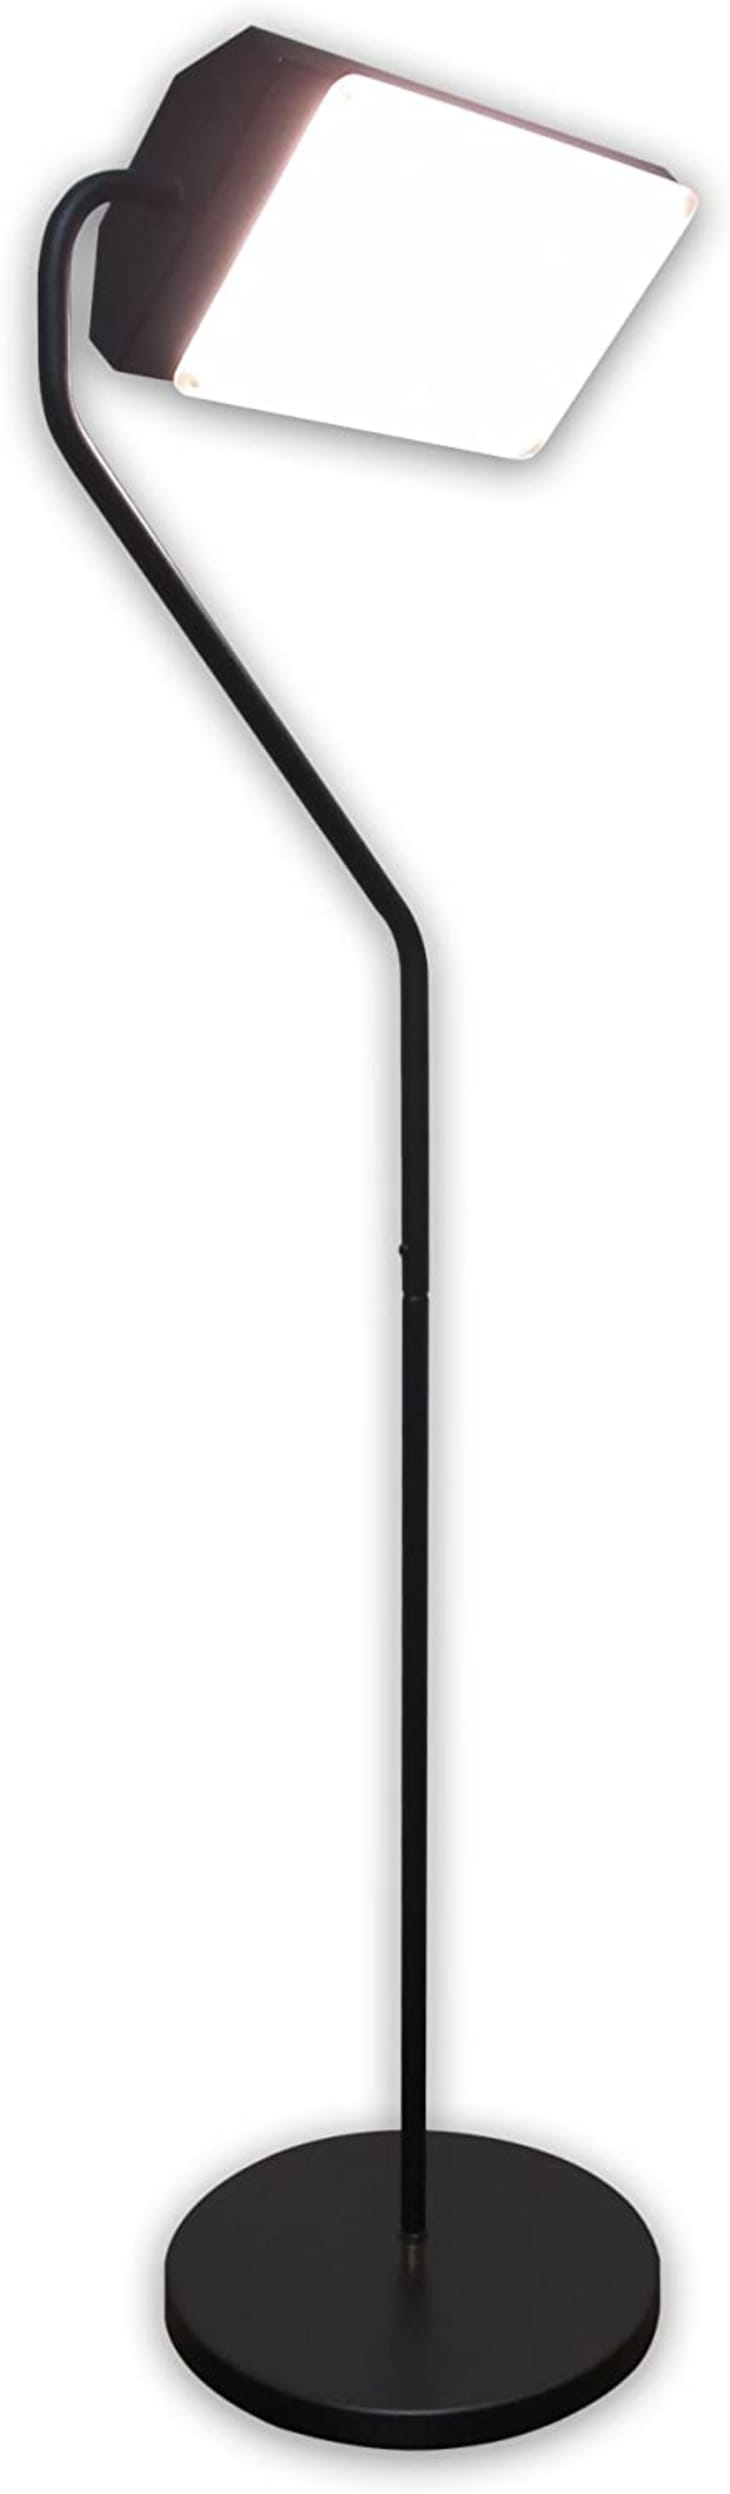 Flamingo 10,000 Lux Bright Light Therapy Floor Lamp at Amazon